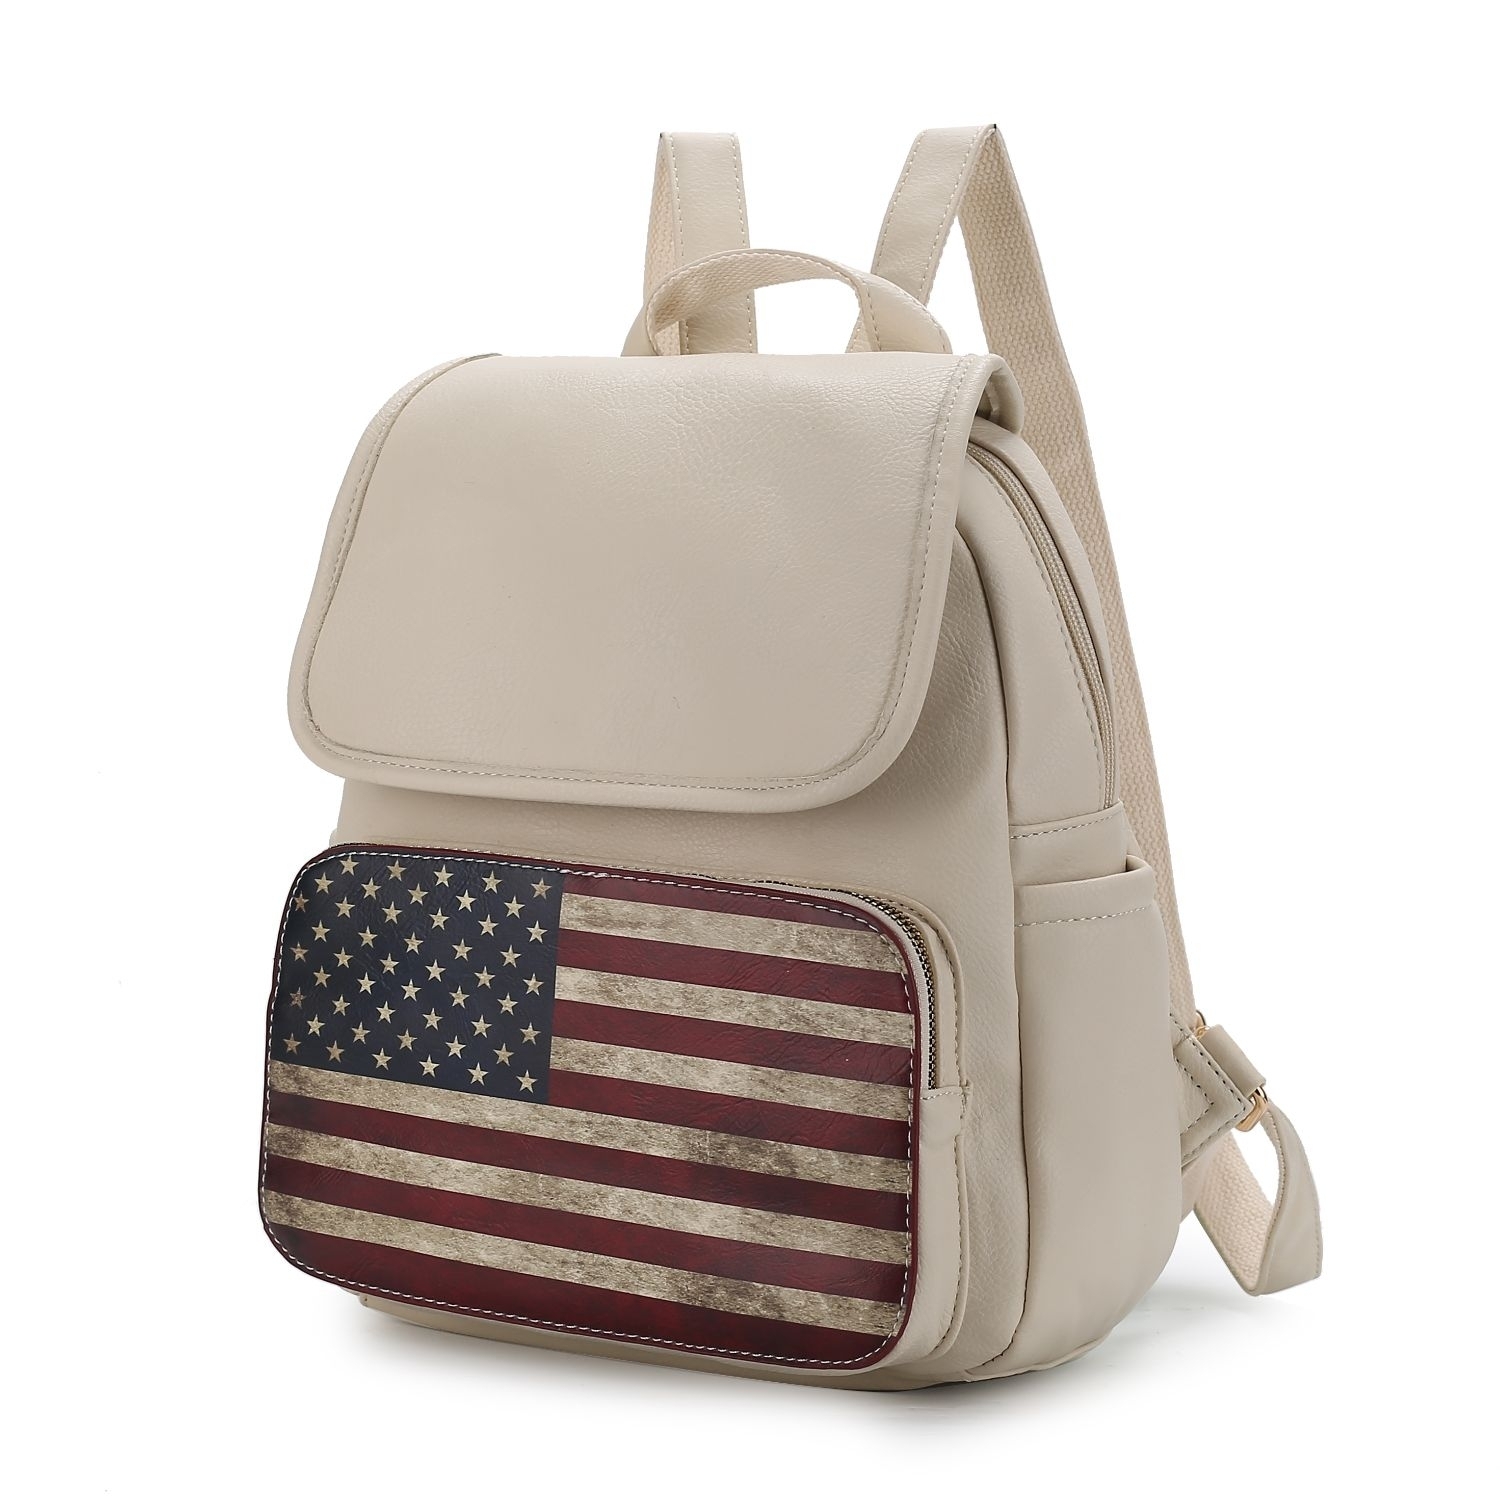 MKF Collection Regina Printed Flag Vegan Leather Womens Backpack By Mia K - Tan